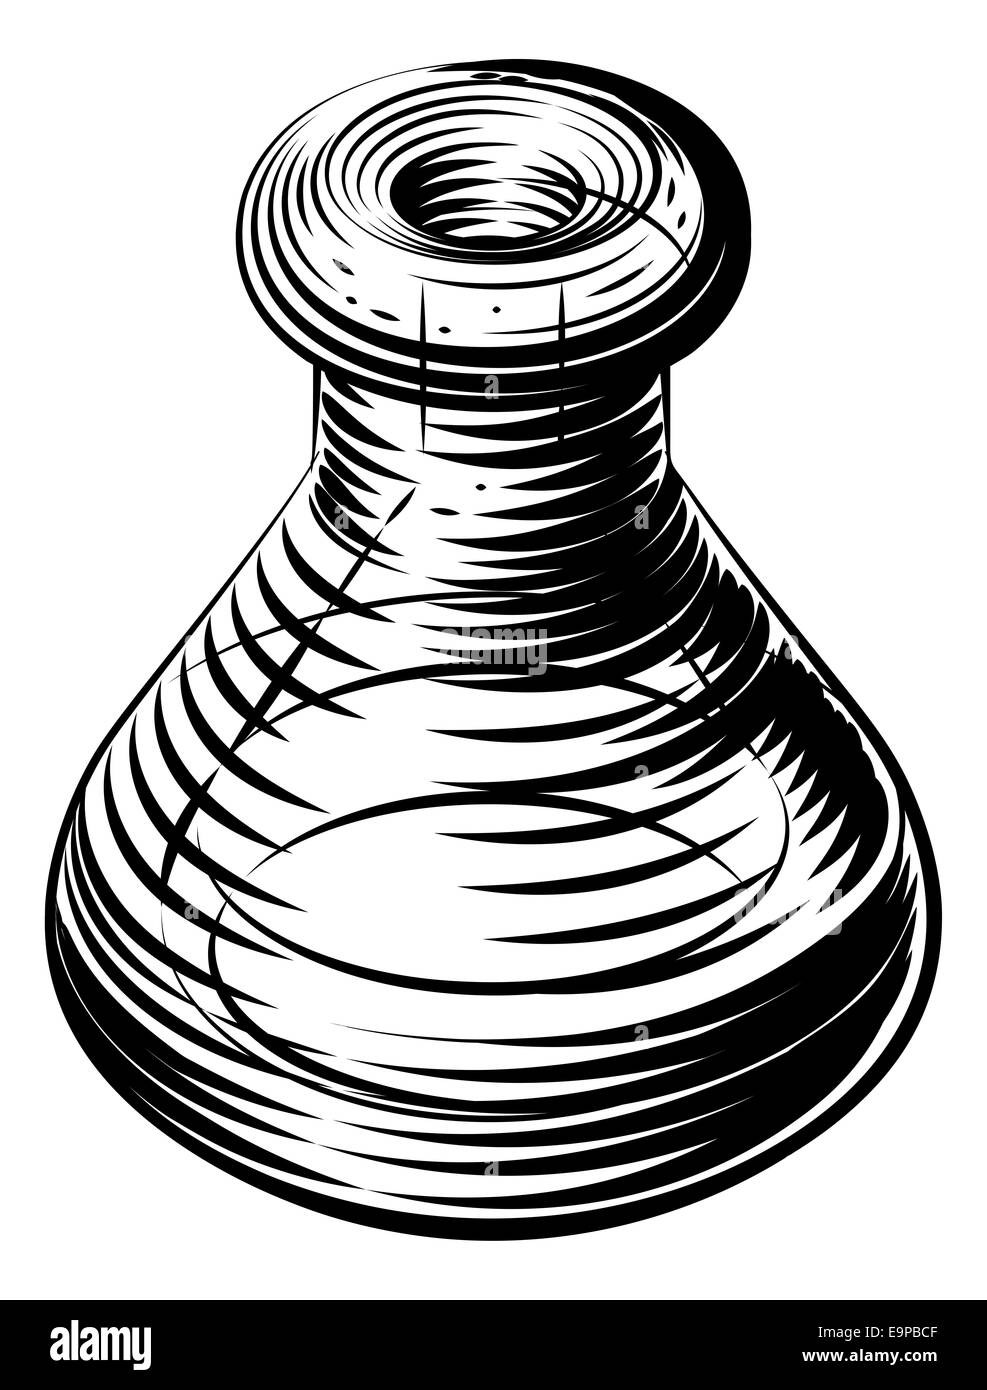 A an original illustration of a vintage woodcut style beaker or flask icon Stock Photo